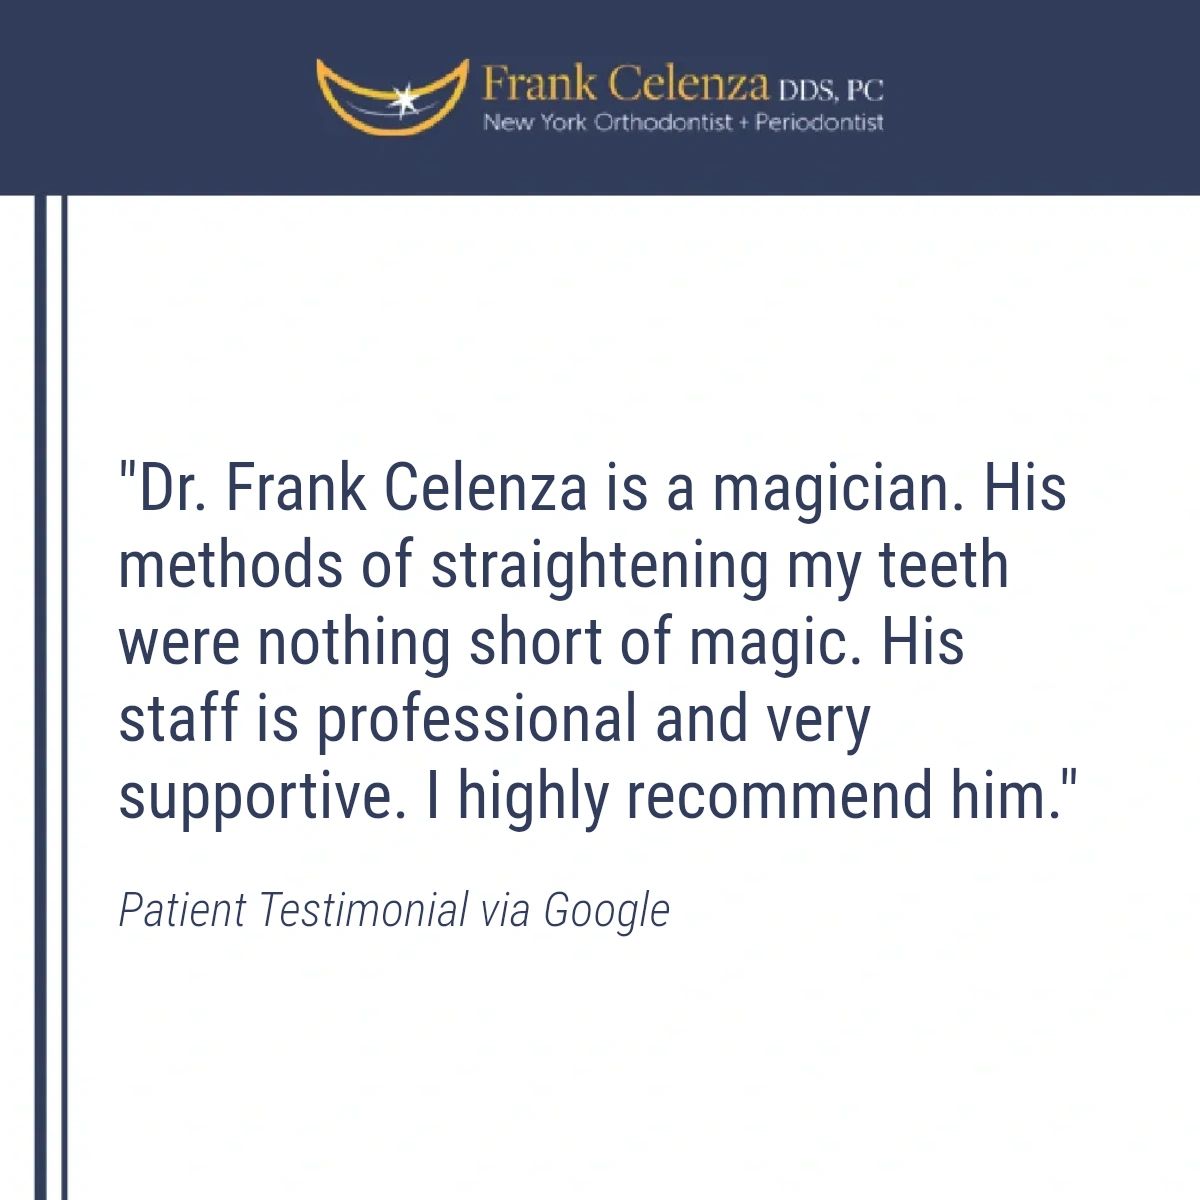 If you're looking for an orthodontist who has that magic touch, simply visit our office. ✨ #FrankCelenzaDDS #orthodontics #NewYorkNY